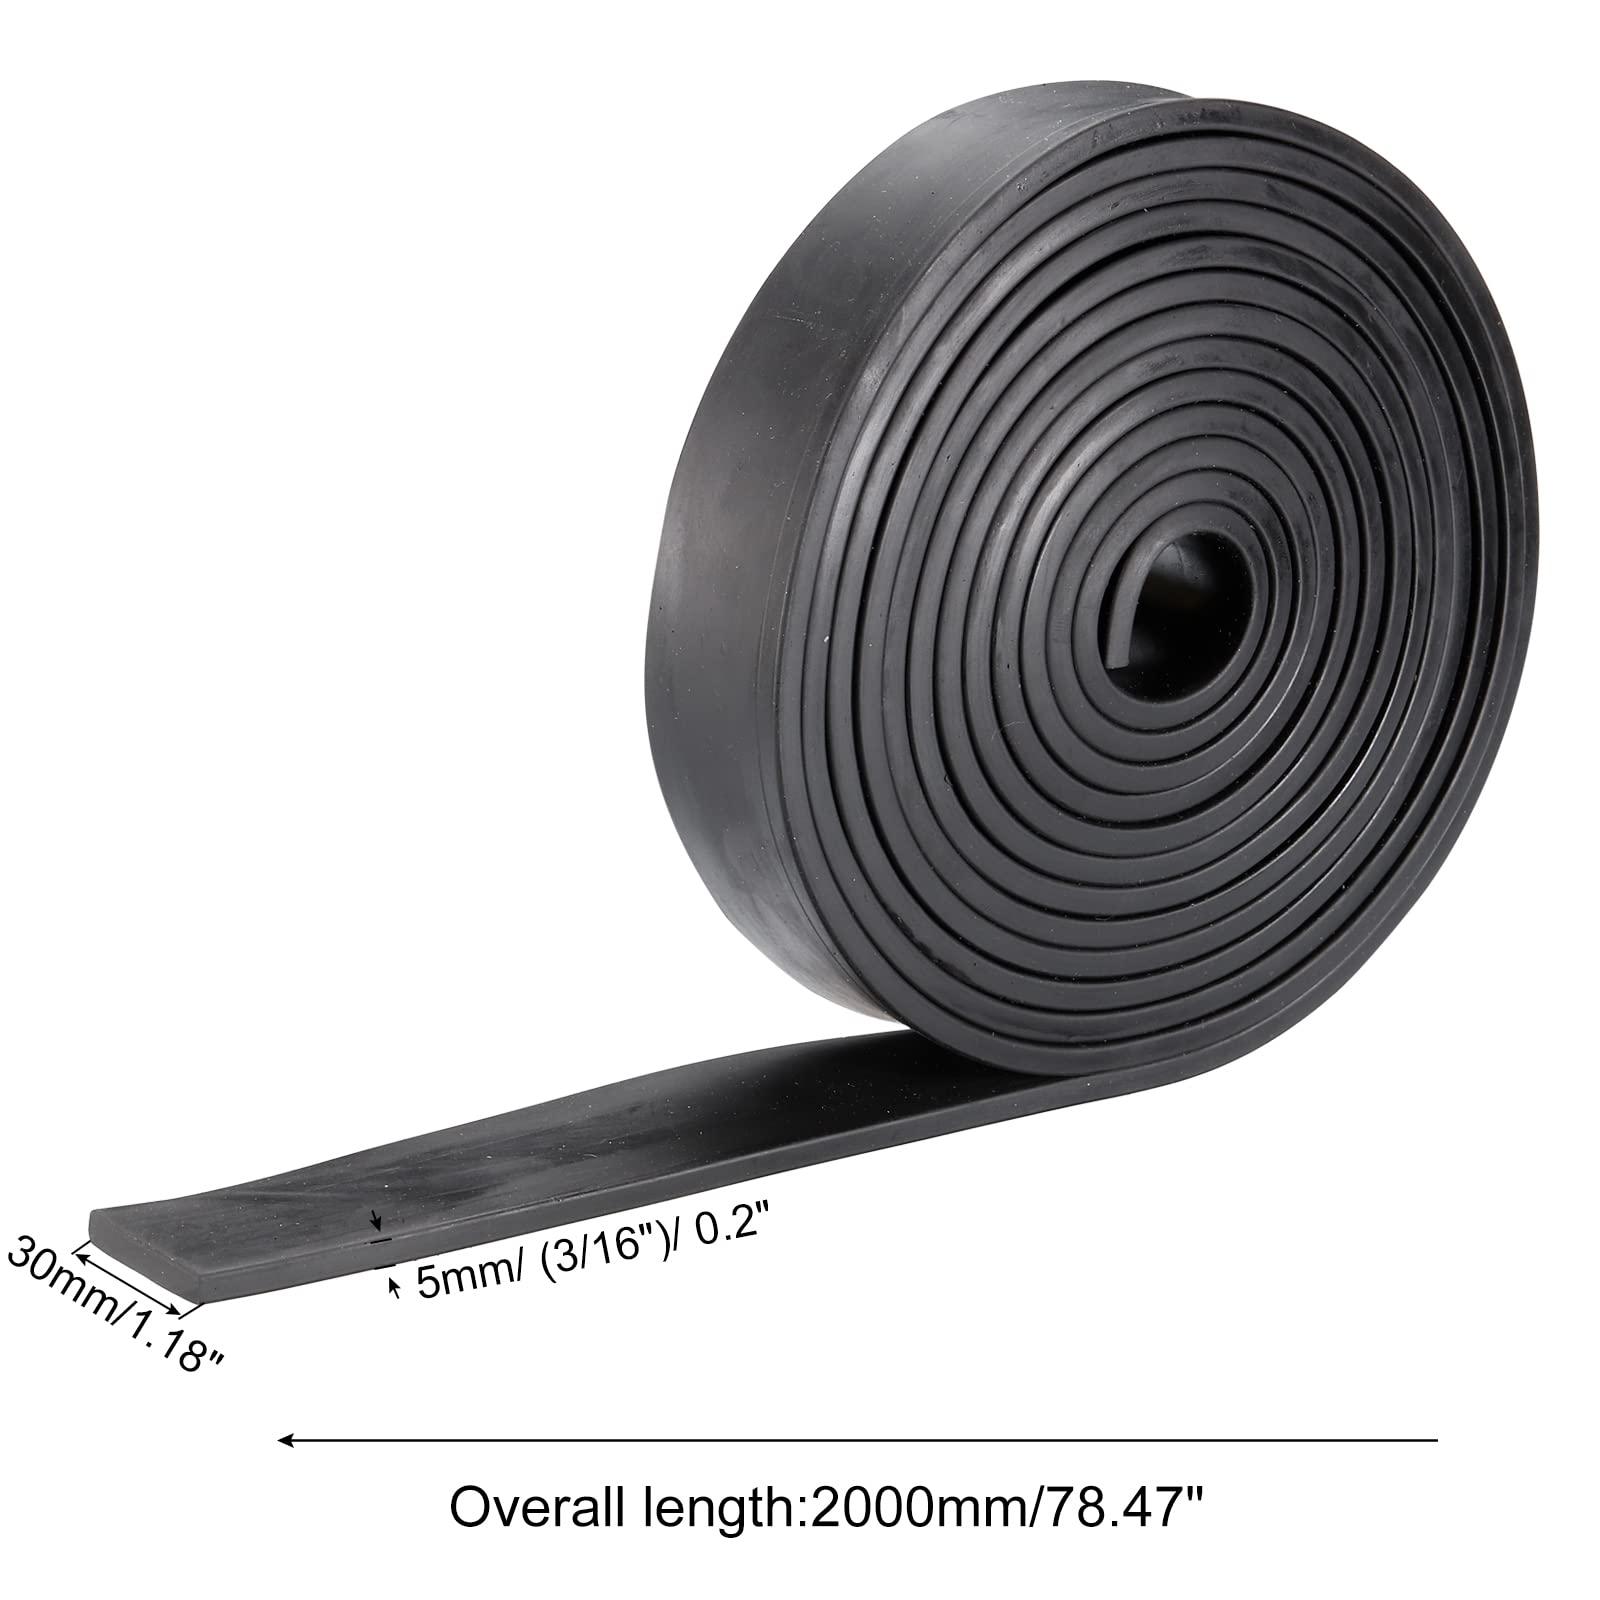 sourcing map Neoprene Rubber Sheet Rolls 5mm(T) x30mm(W) x2m(L), Solid Rubber Strips for DIY Gasket, Sealing Padding, Reduce Vibration Mat 1